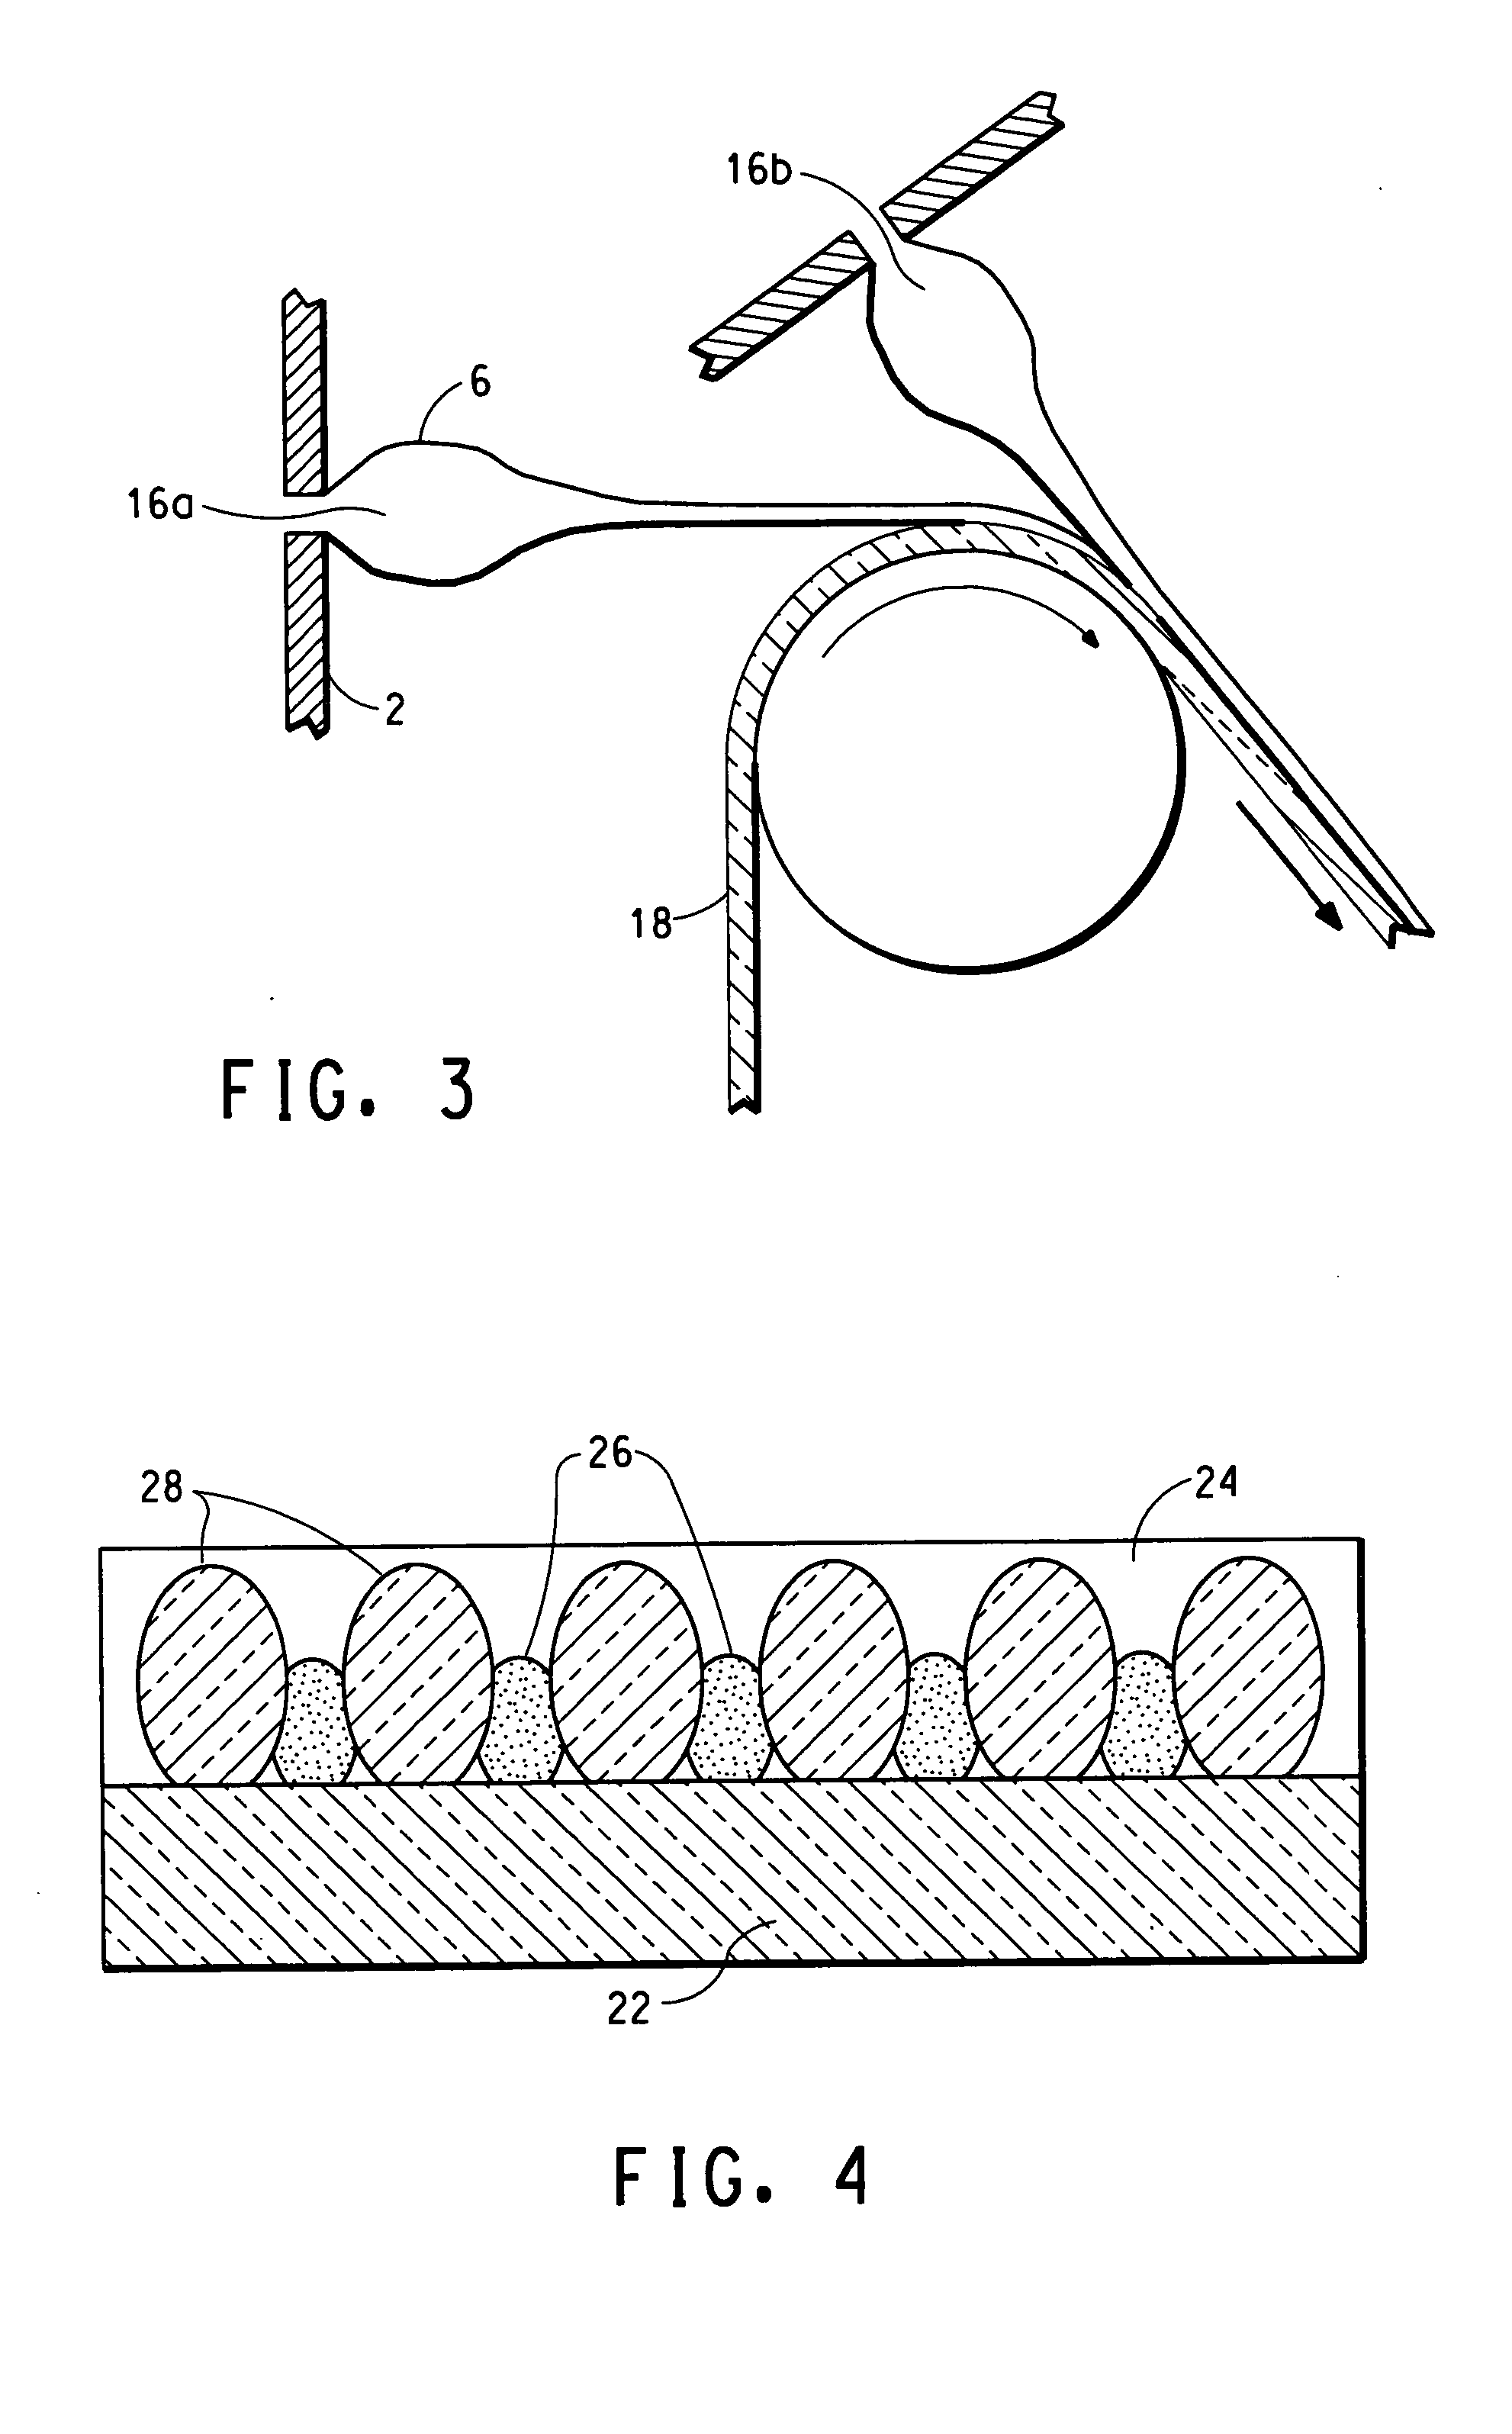 Spin-printing of electronic and display components